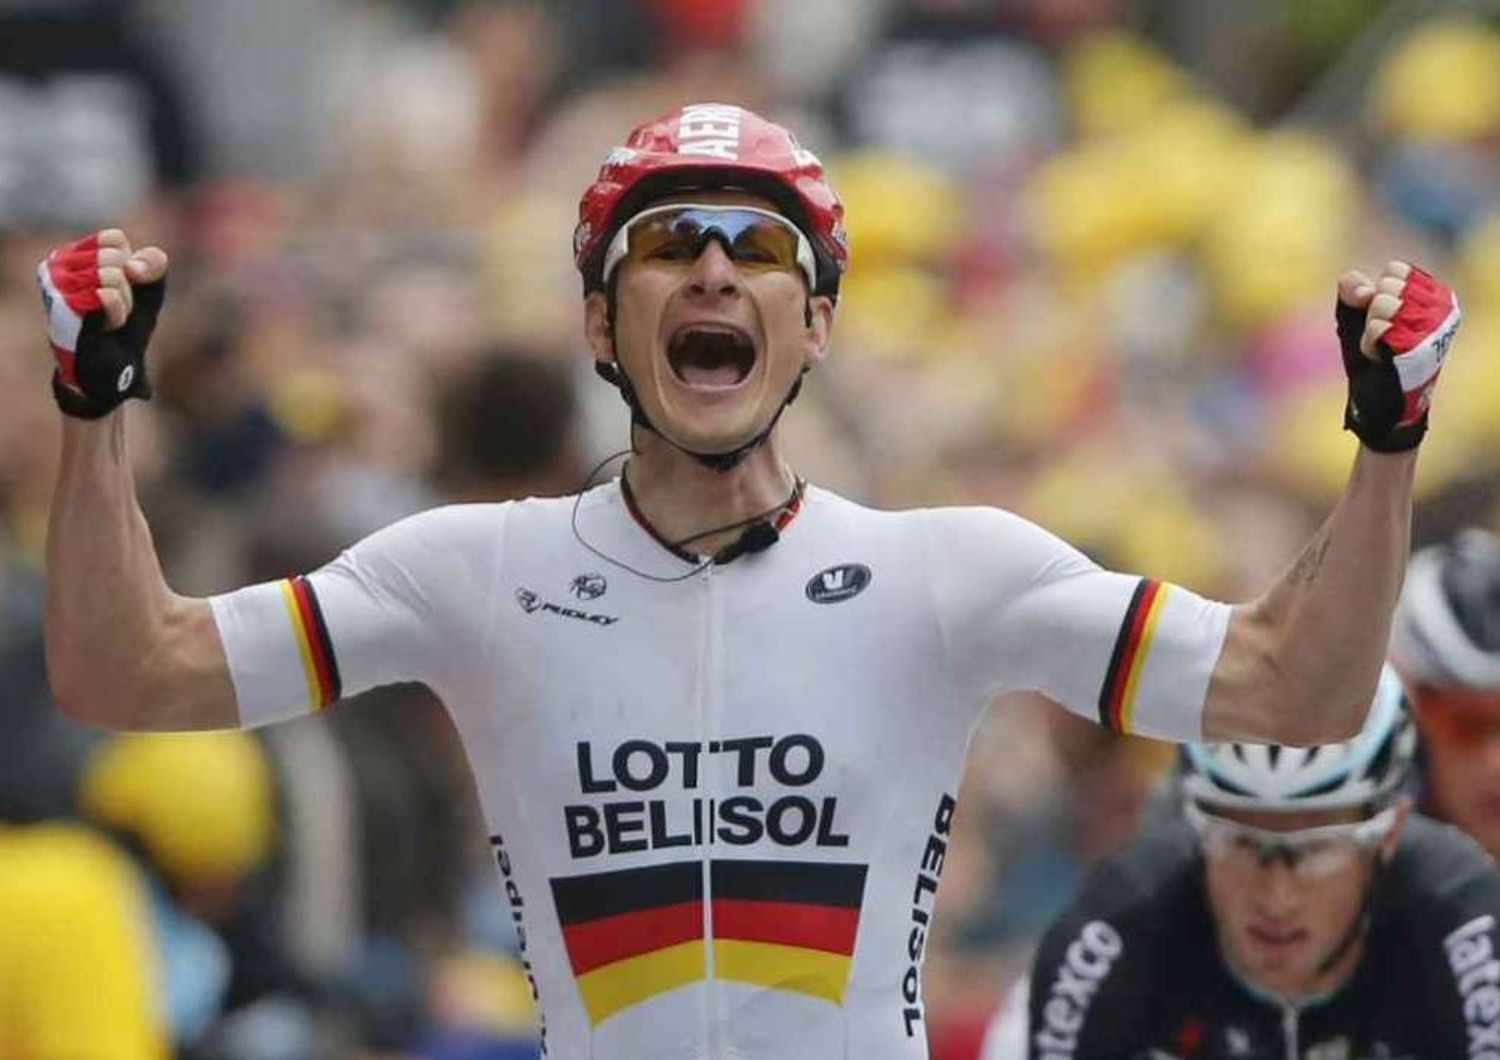 Tour 2014: Greipel wins stage to Reims in a sprint